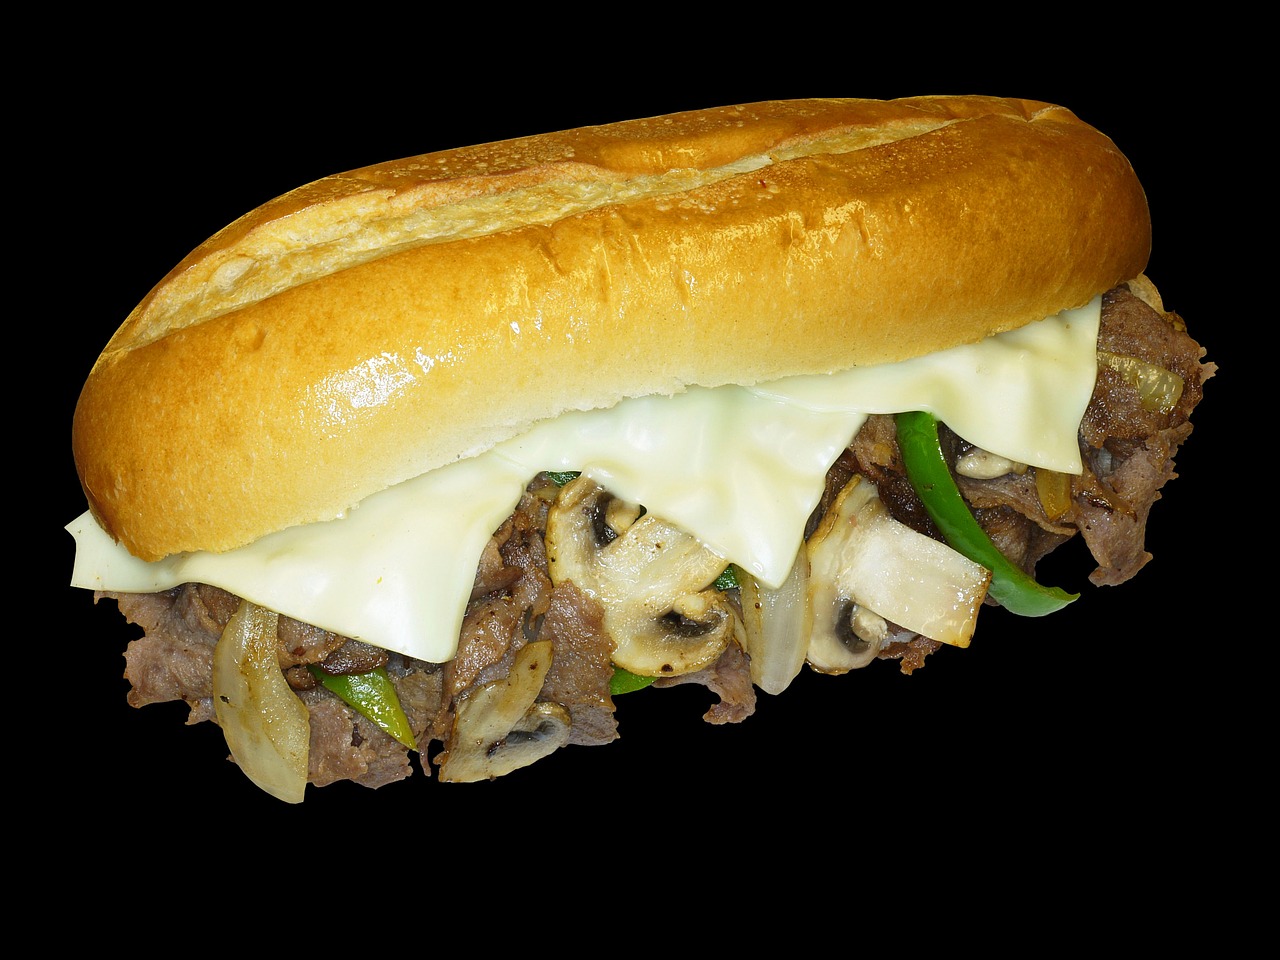 Barbecued Beef Sandwiches